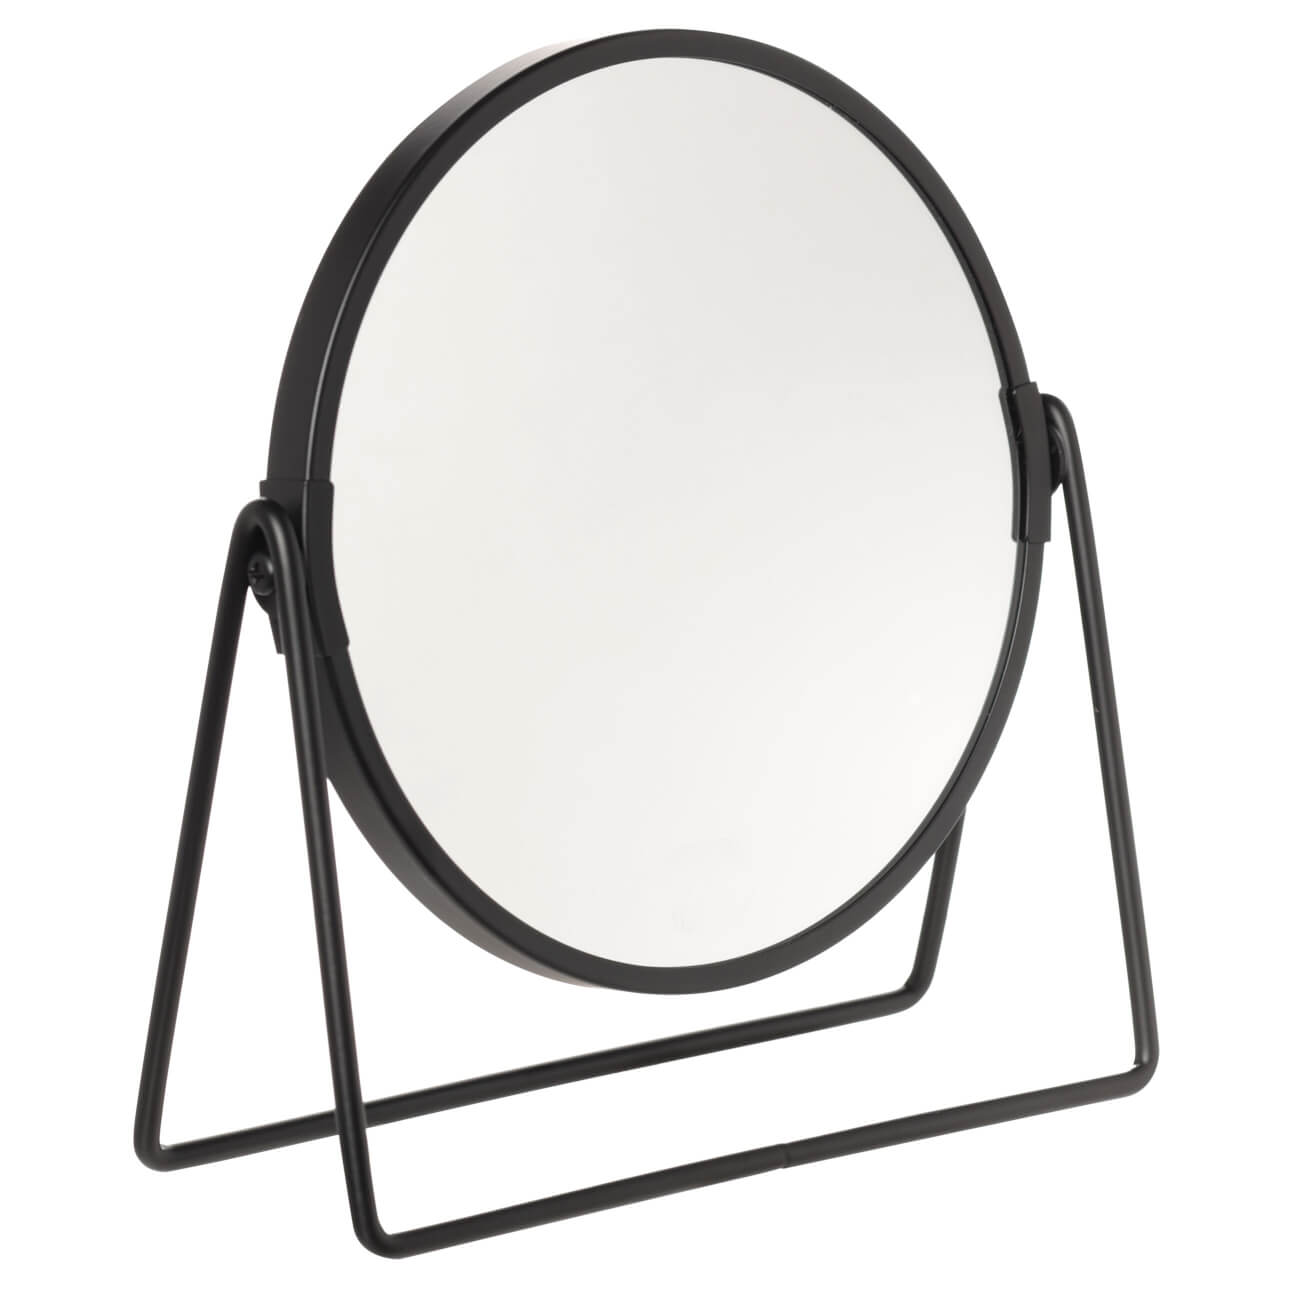 Table mirror, 20 cm, double-sided, metal, round, Black, Graphic изображение № 1